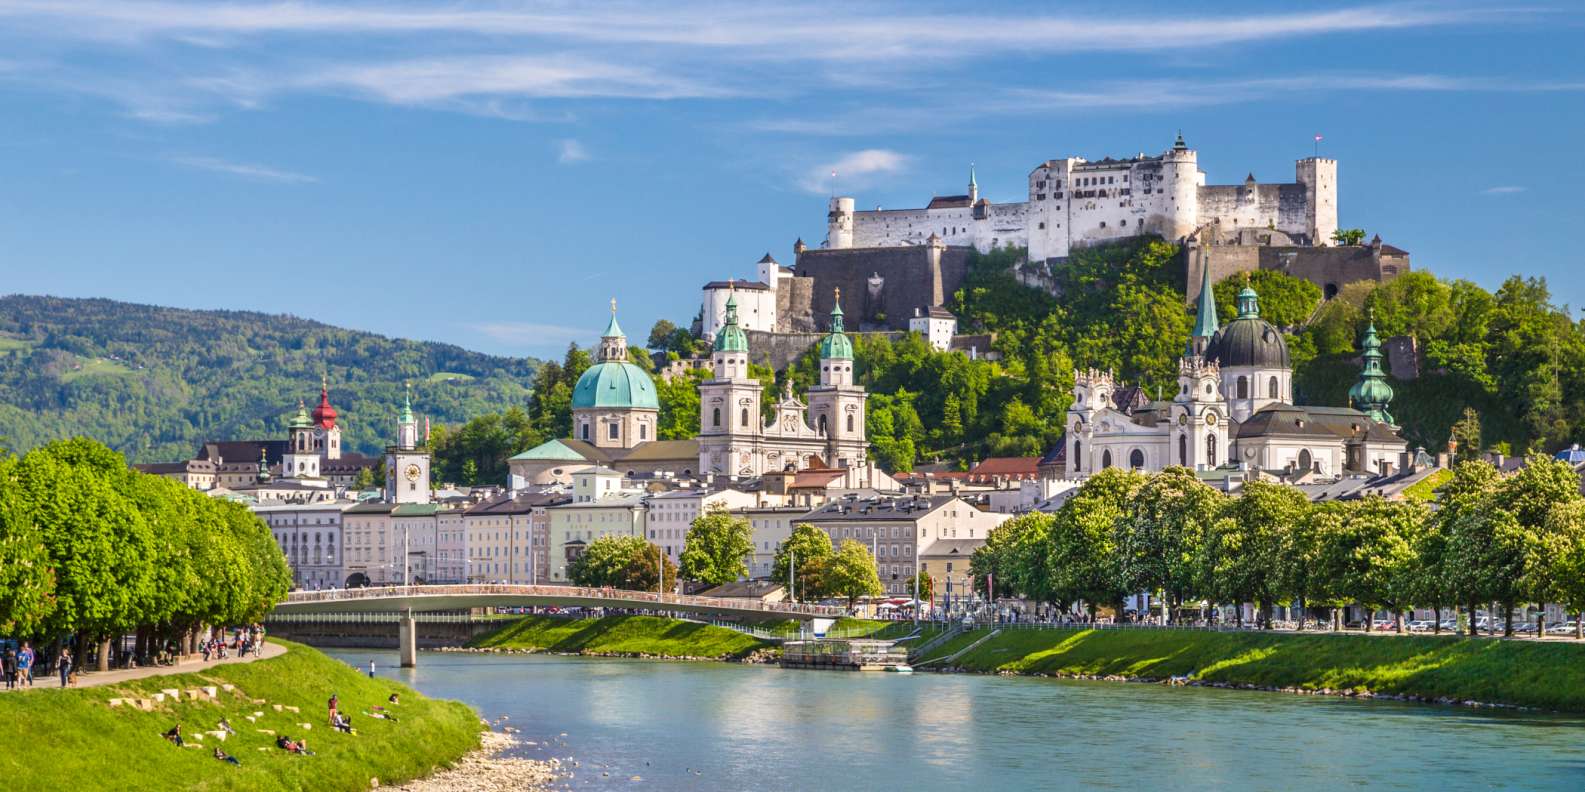 Best Tours In Salzburg: Discovering The Beauty Of The City